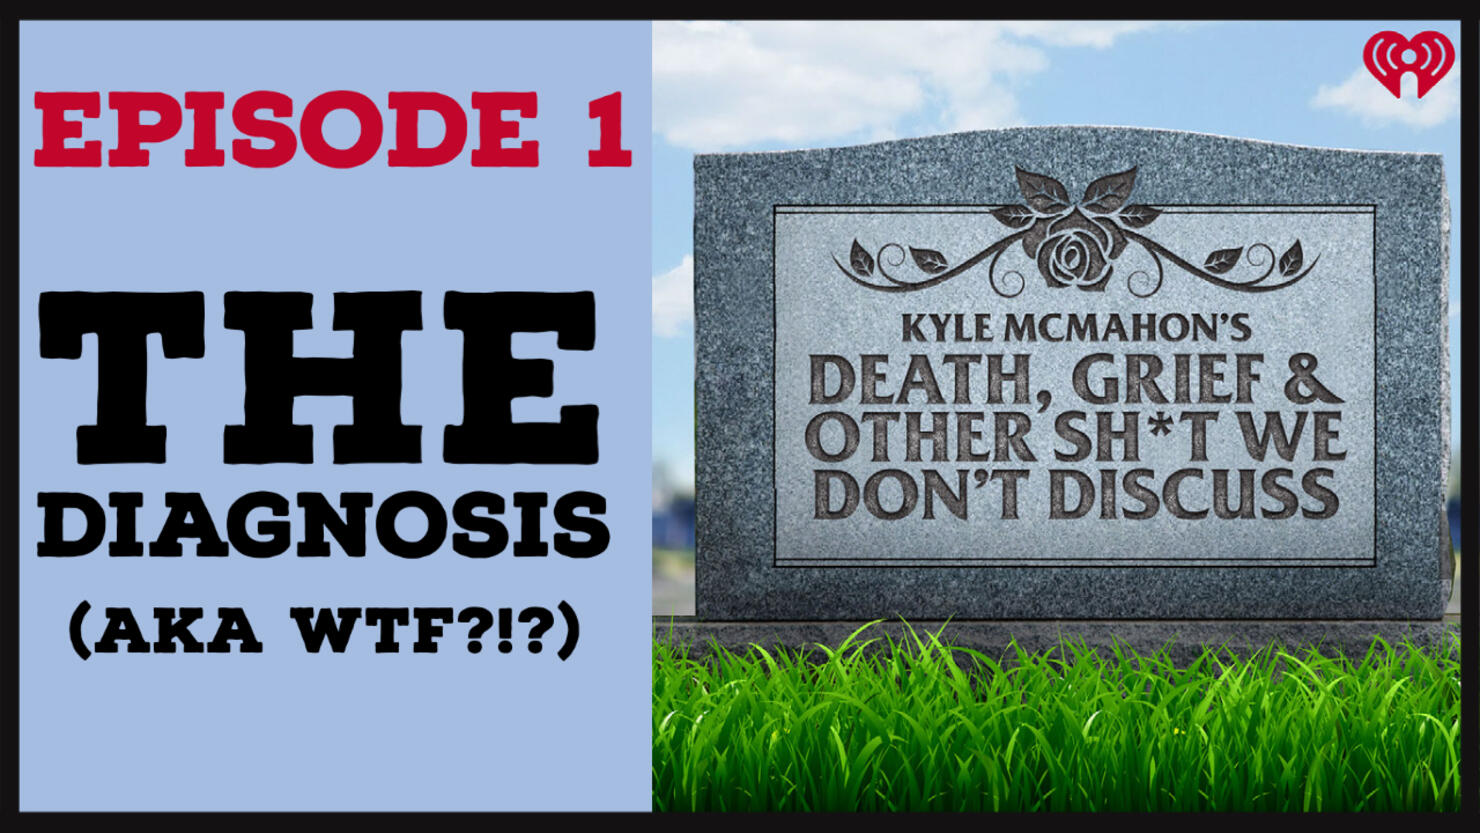 Episode 1: The Diagnosis (AKA WTF?) from Kyle McMahon's Death, Grief & Other Sh*t We Don't Discuss